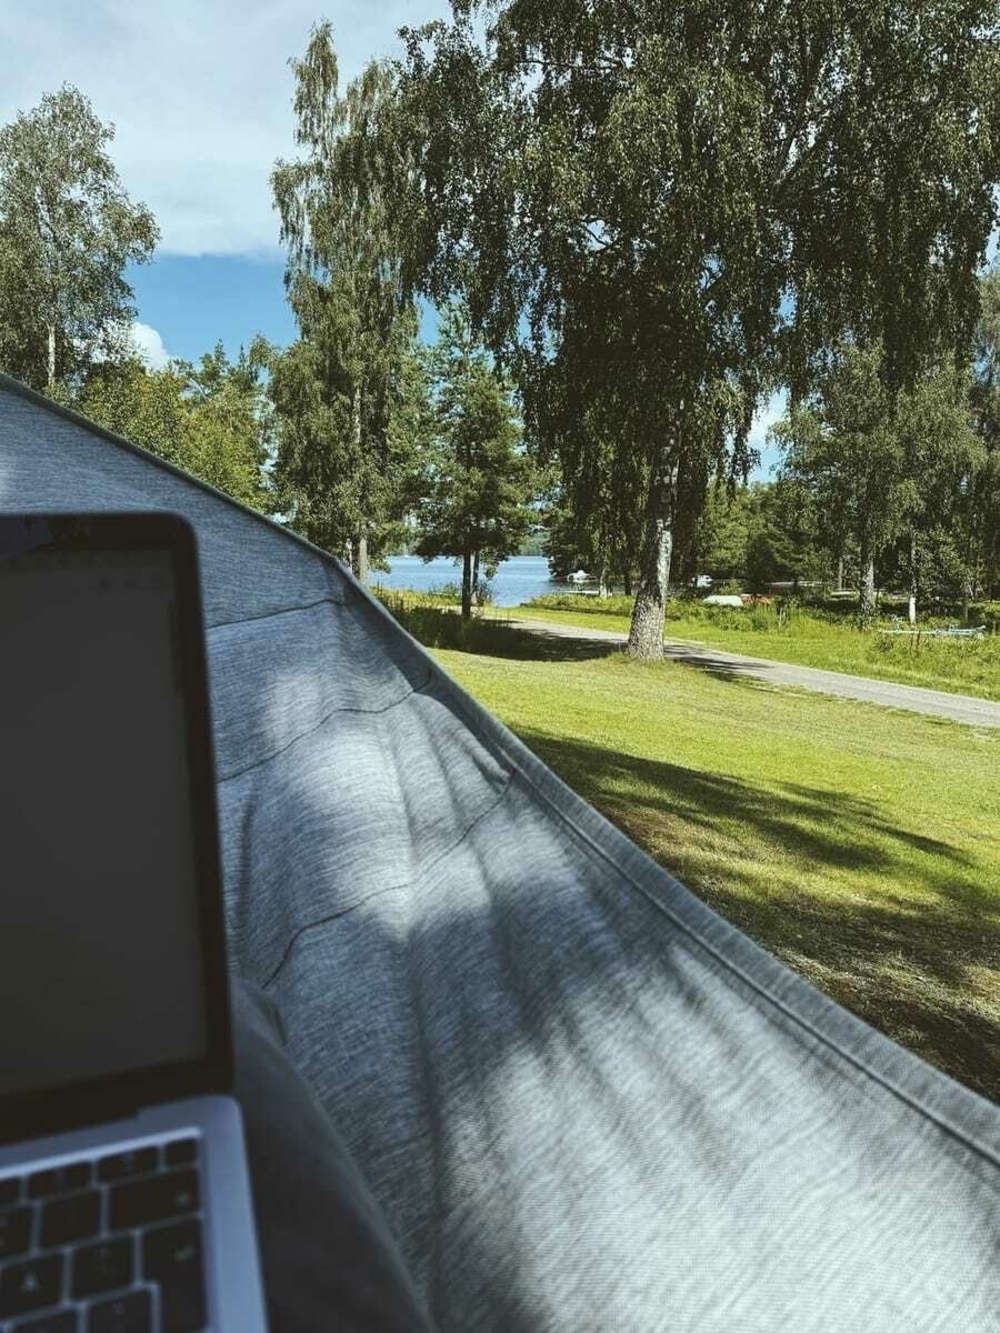 View from a hammock overlooking trees and a lake with a glimpse of a laptop on a pillow in the foreground.